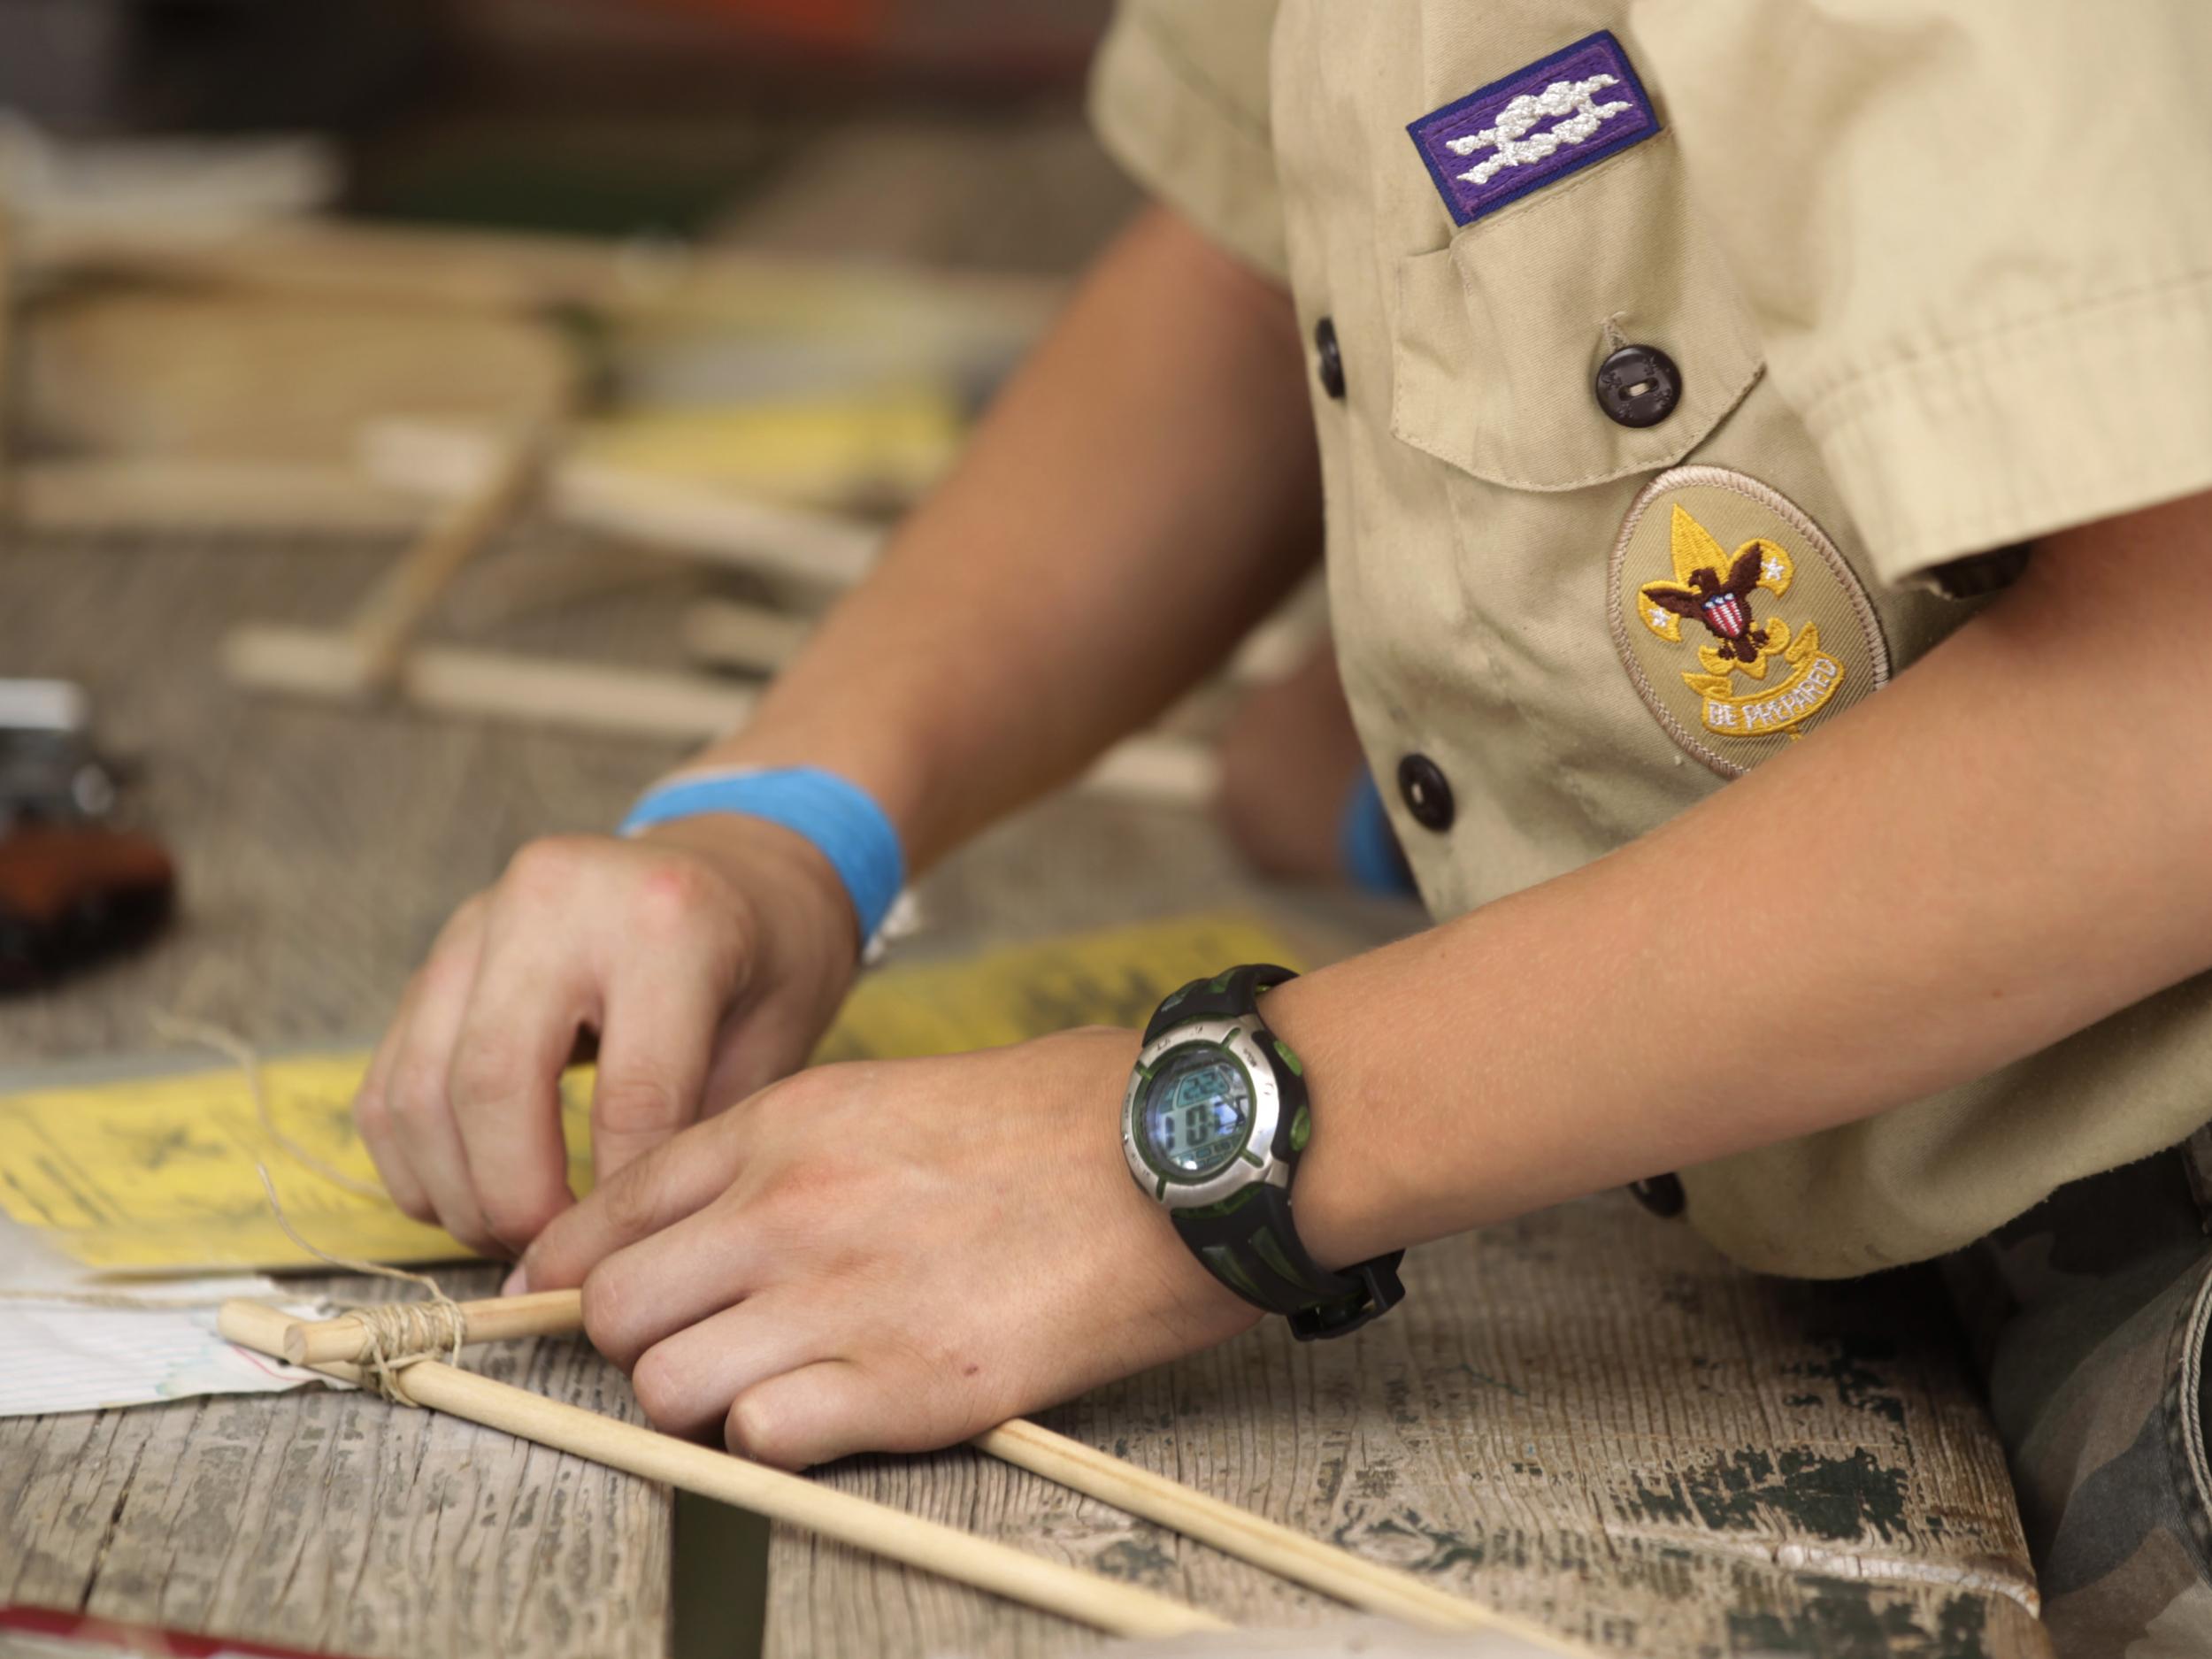 The Boy Scouts scandal shows the sexual abuse of boys is a far bigger story than we're willing to admit